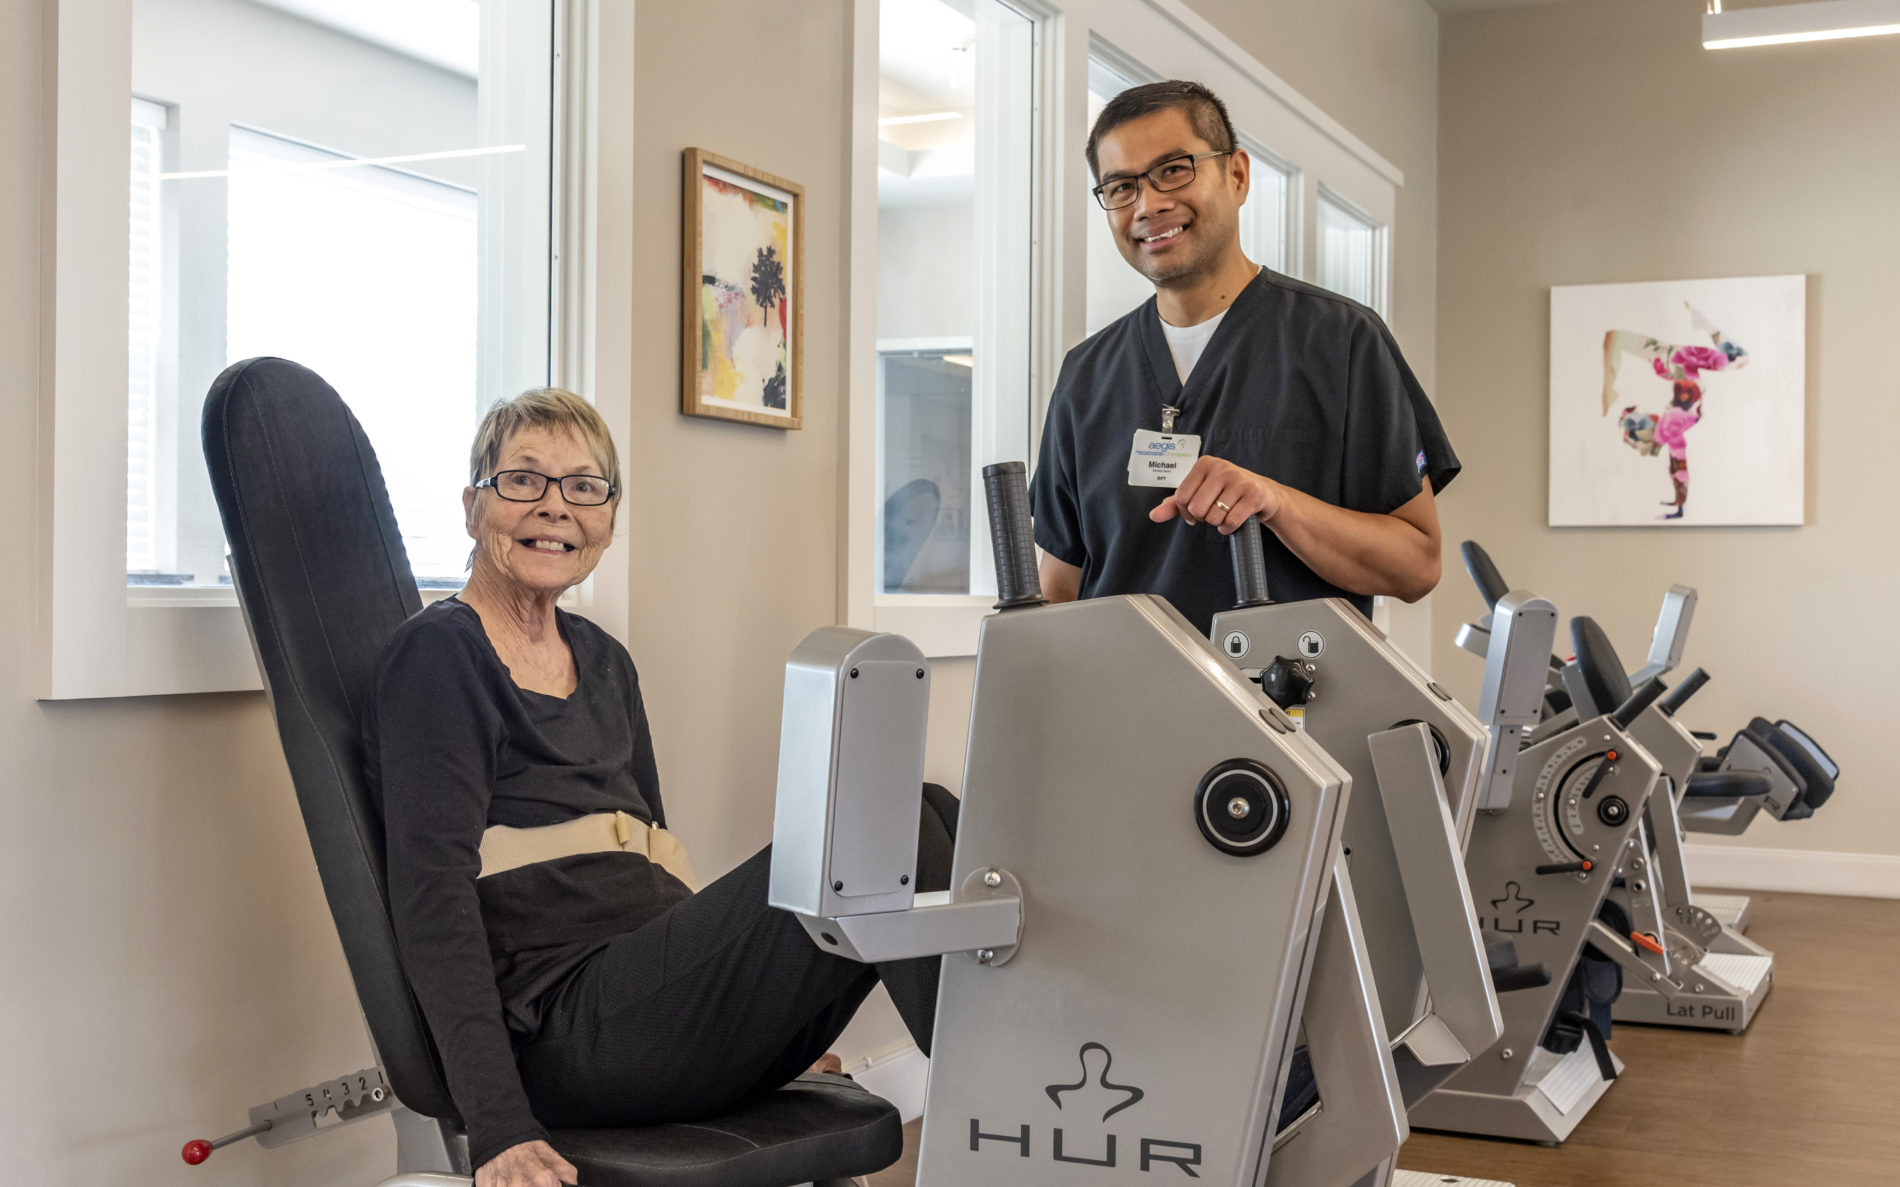 Woman smiling while on therapy machine with smiling employee helping